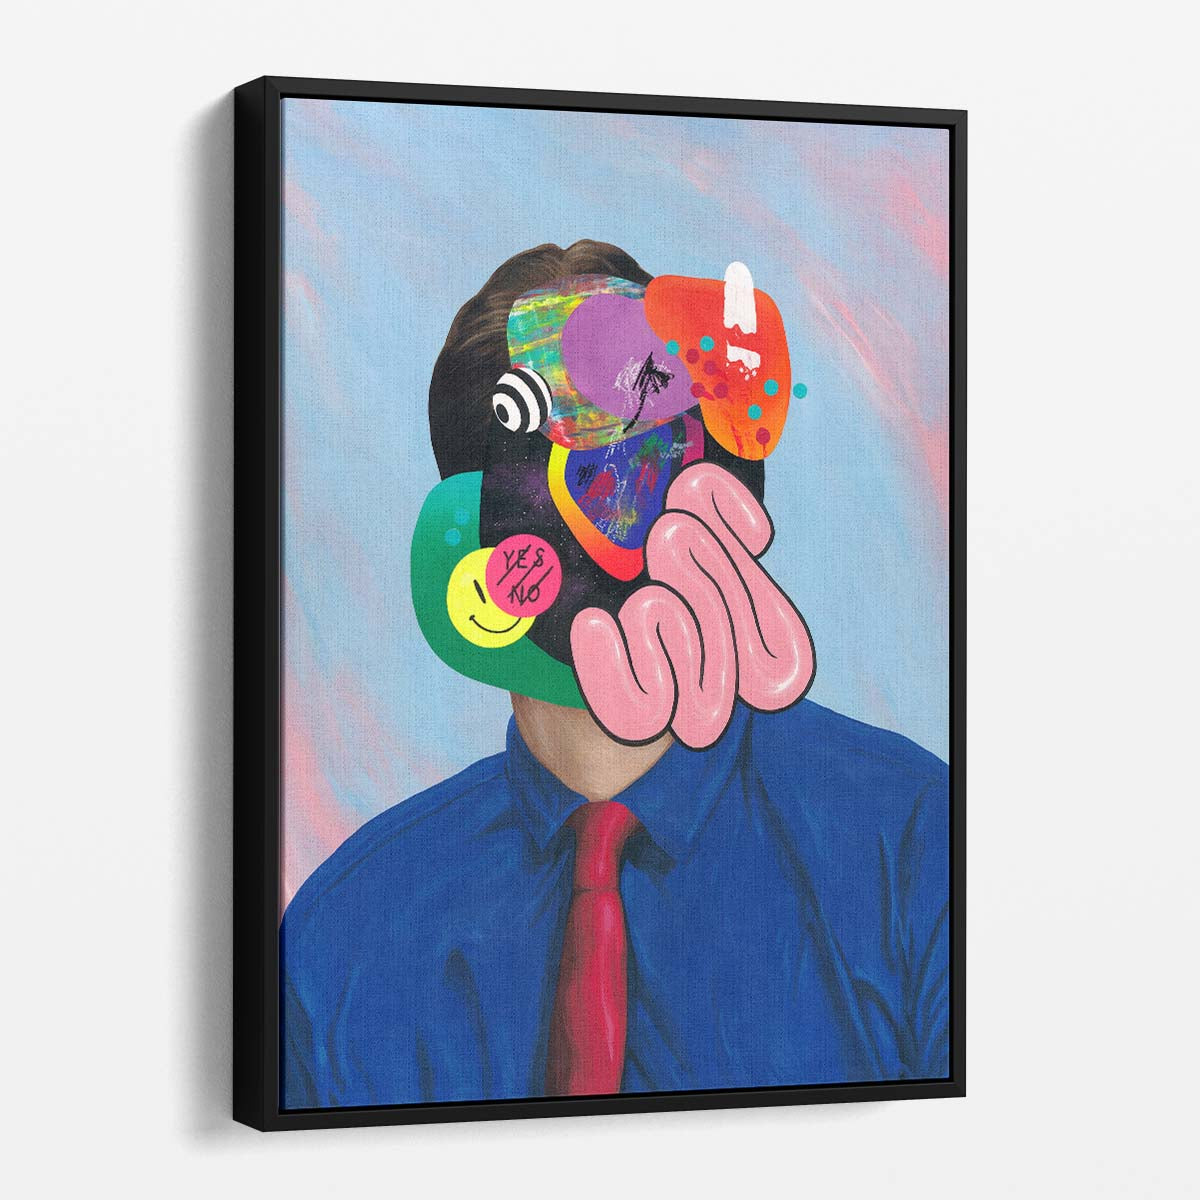 Colorful Surrealist Man Illustration - Pop Art Sky Composite by Luxuriance Designs, made in USA